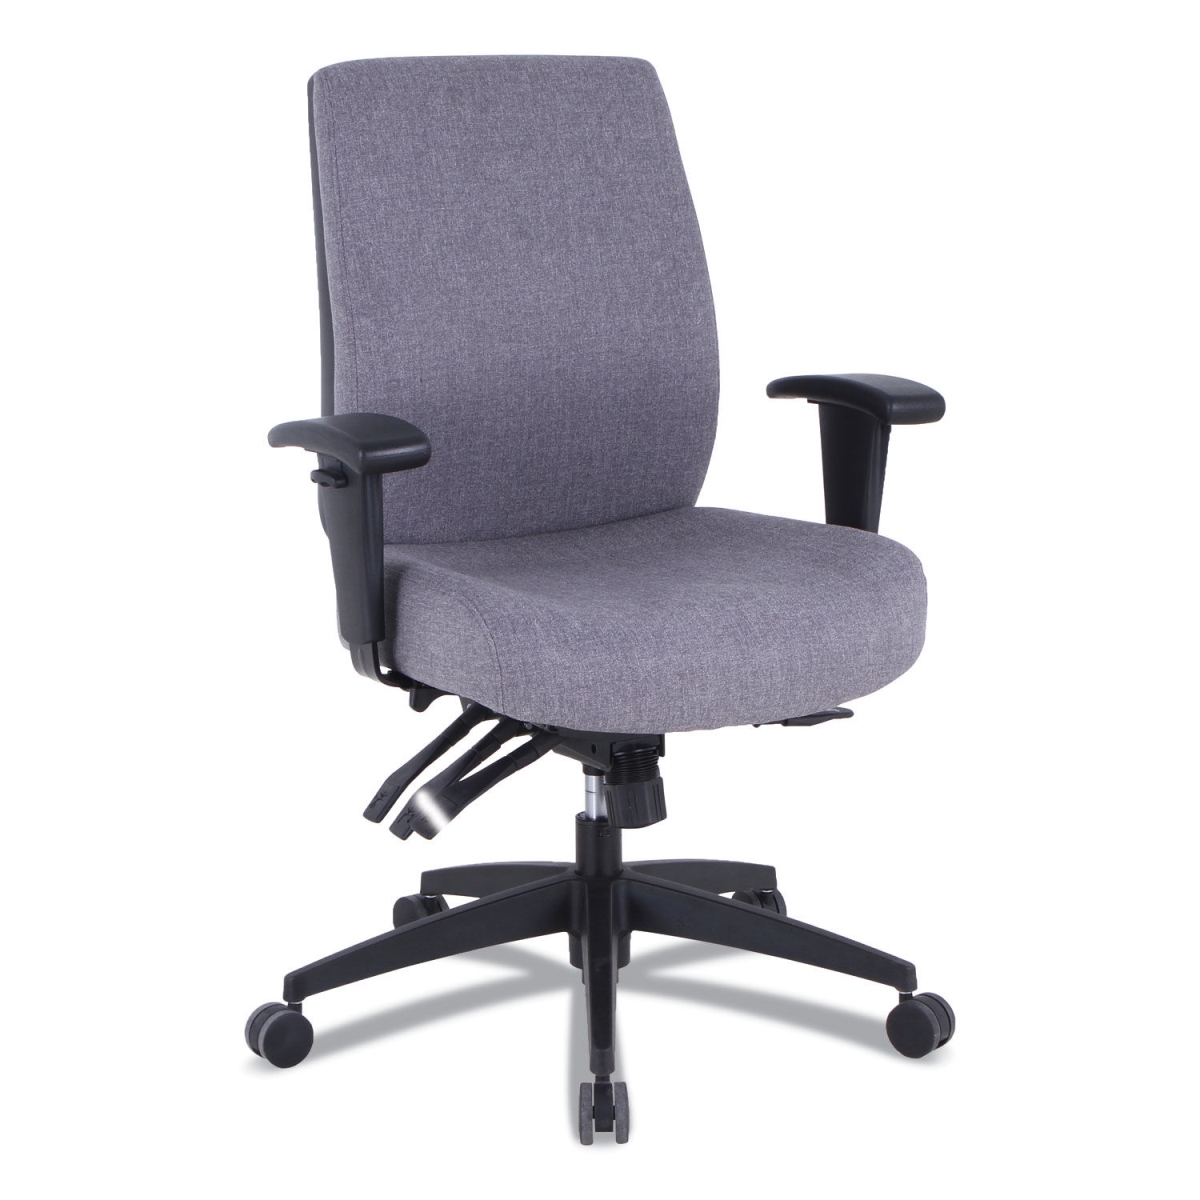 UPC 042167000028 product image for Alera HPT4141 Series 24-7 High Performance High-Back Multifunction Task Chair wi | upcitemdb.com